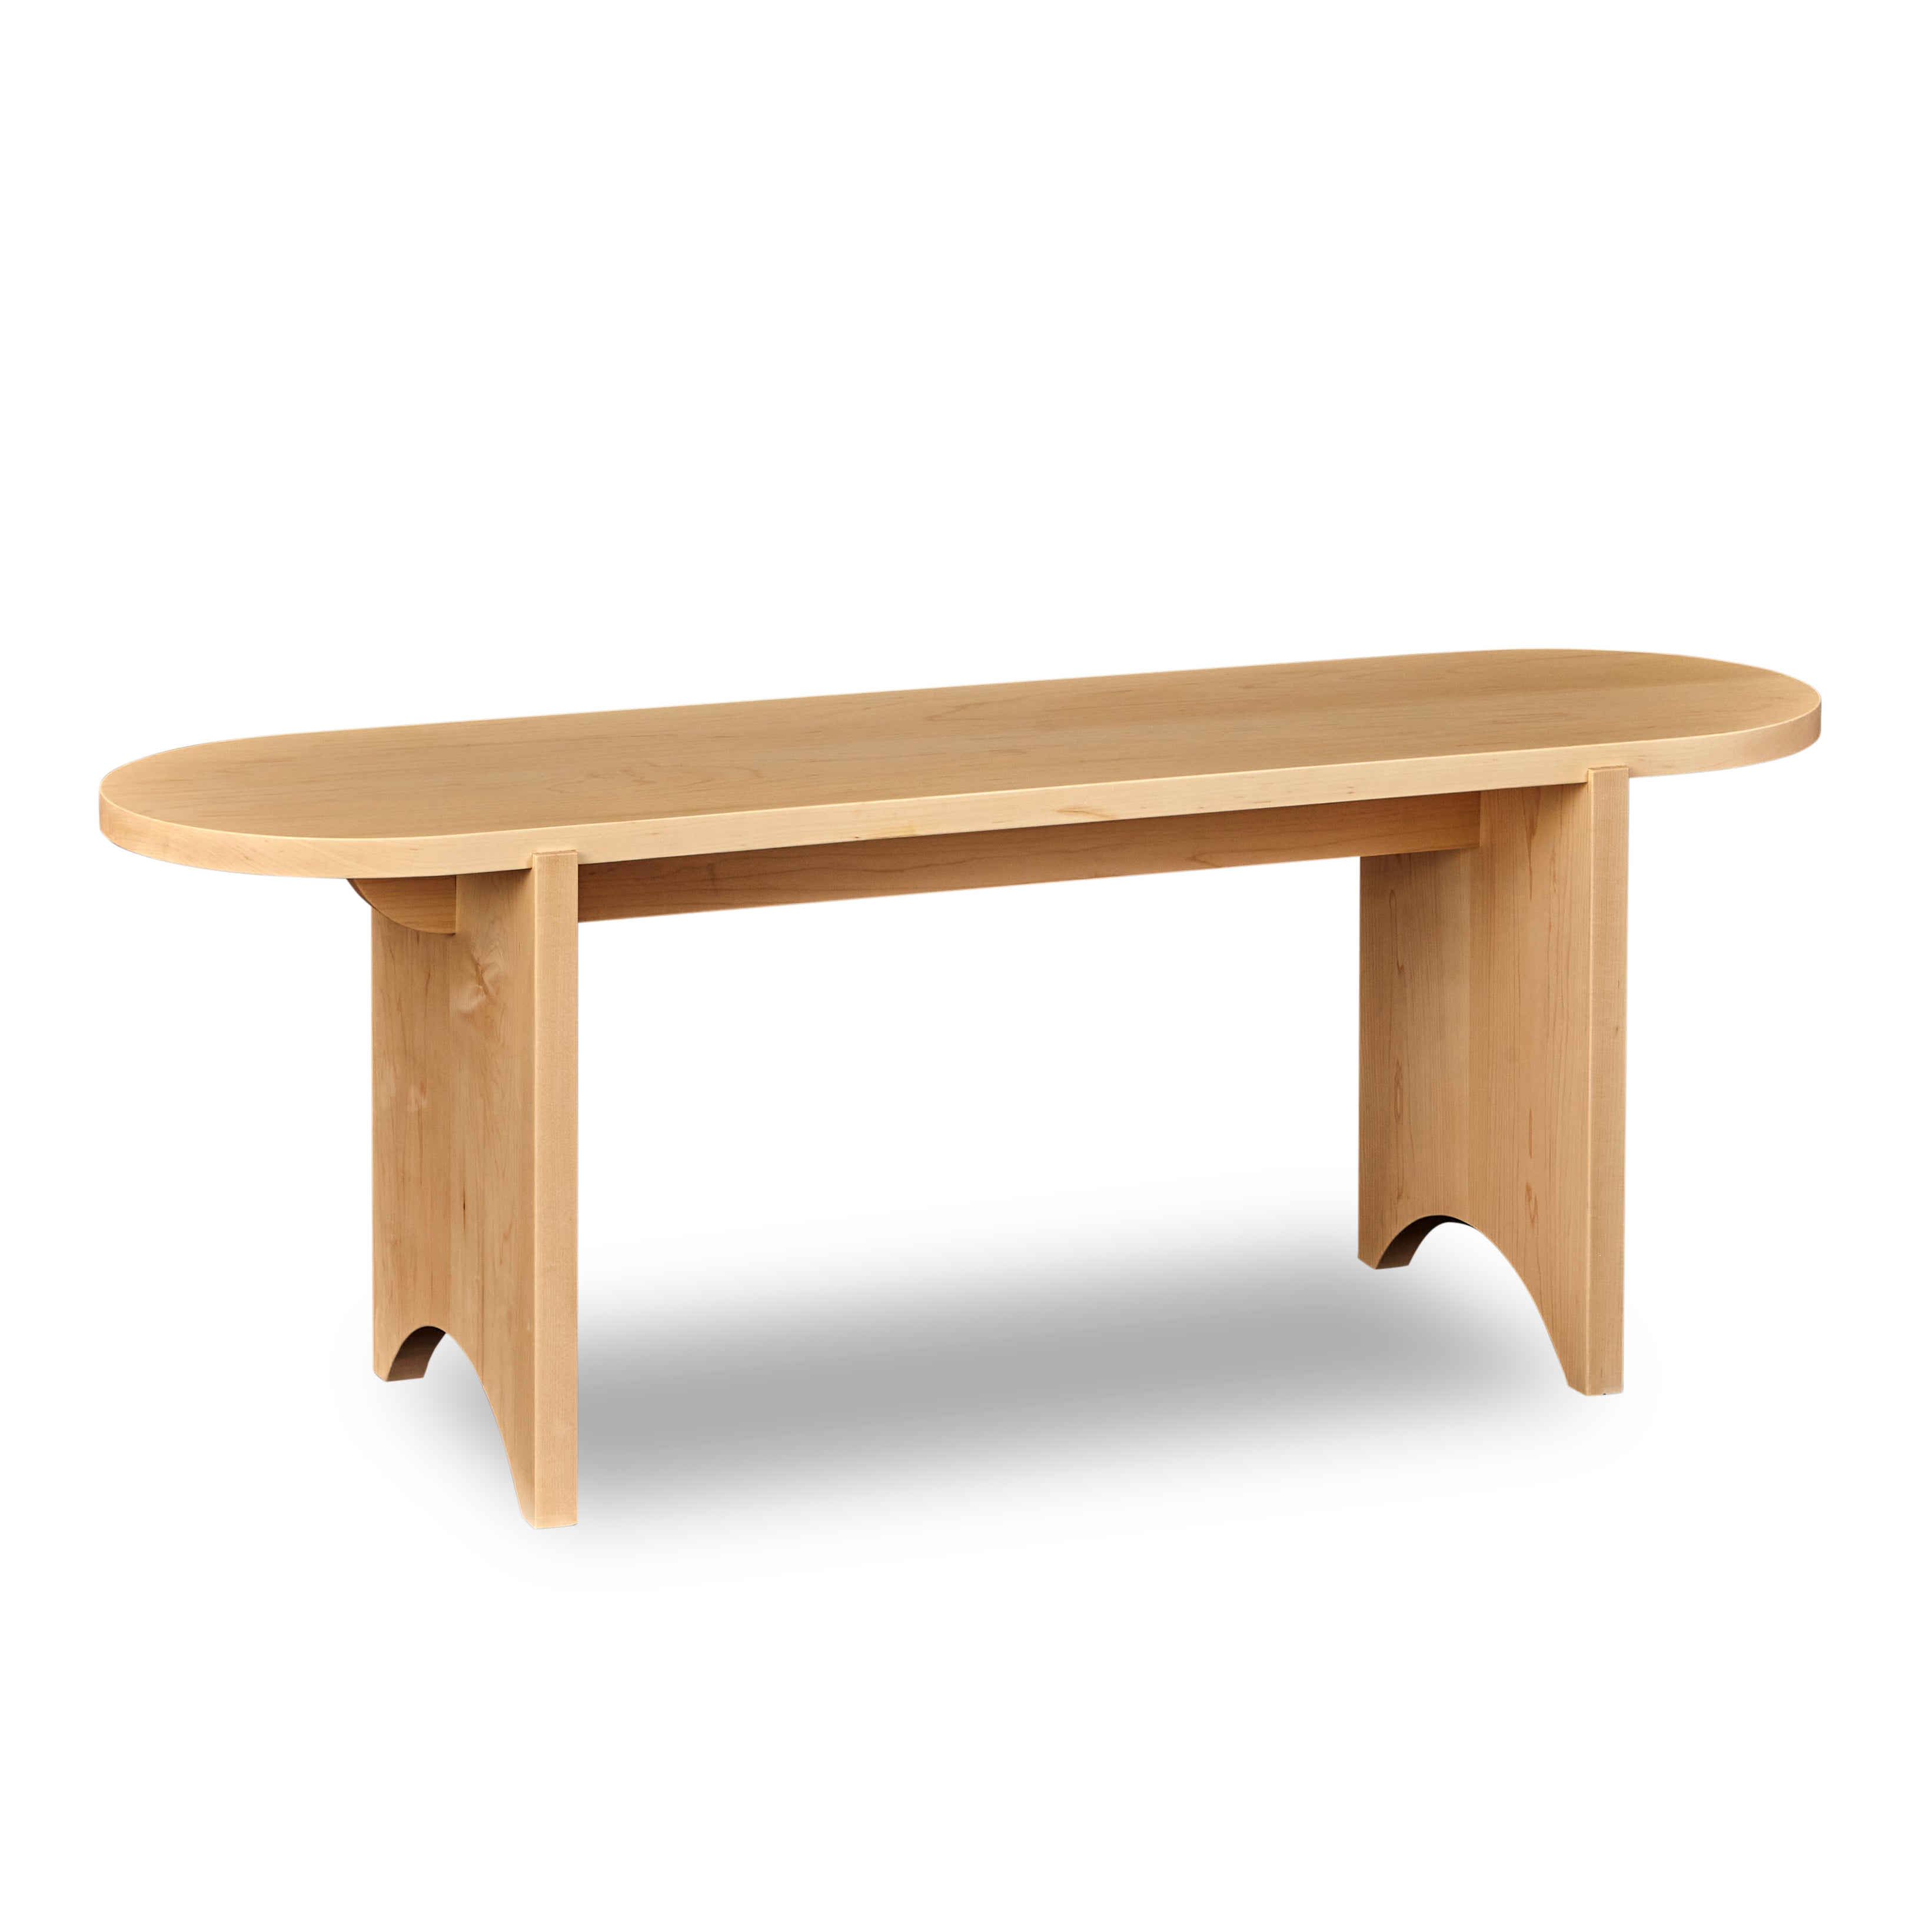 Modern maple bench with rounded edges and legs from Chilton Furniture in Maine